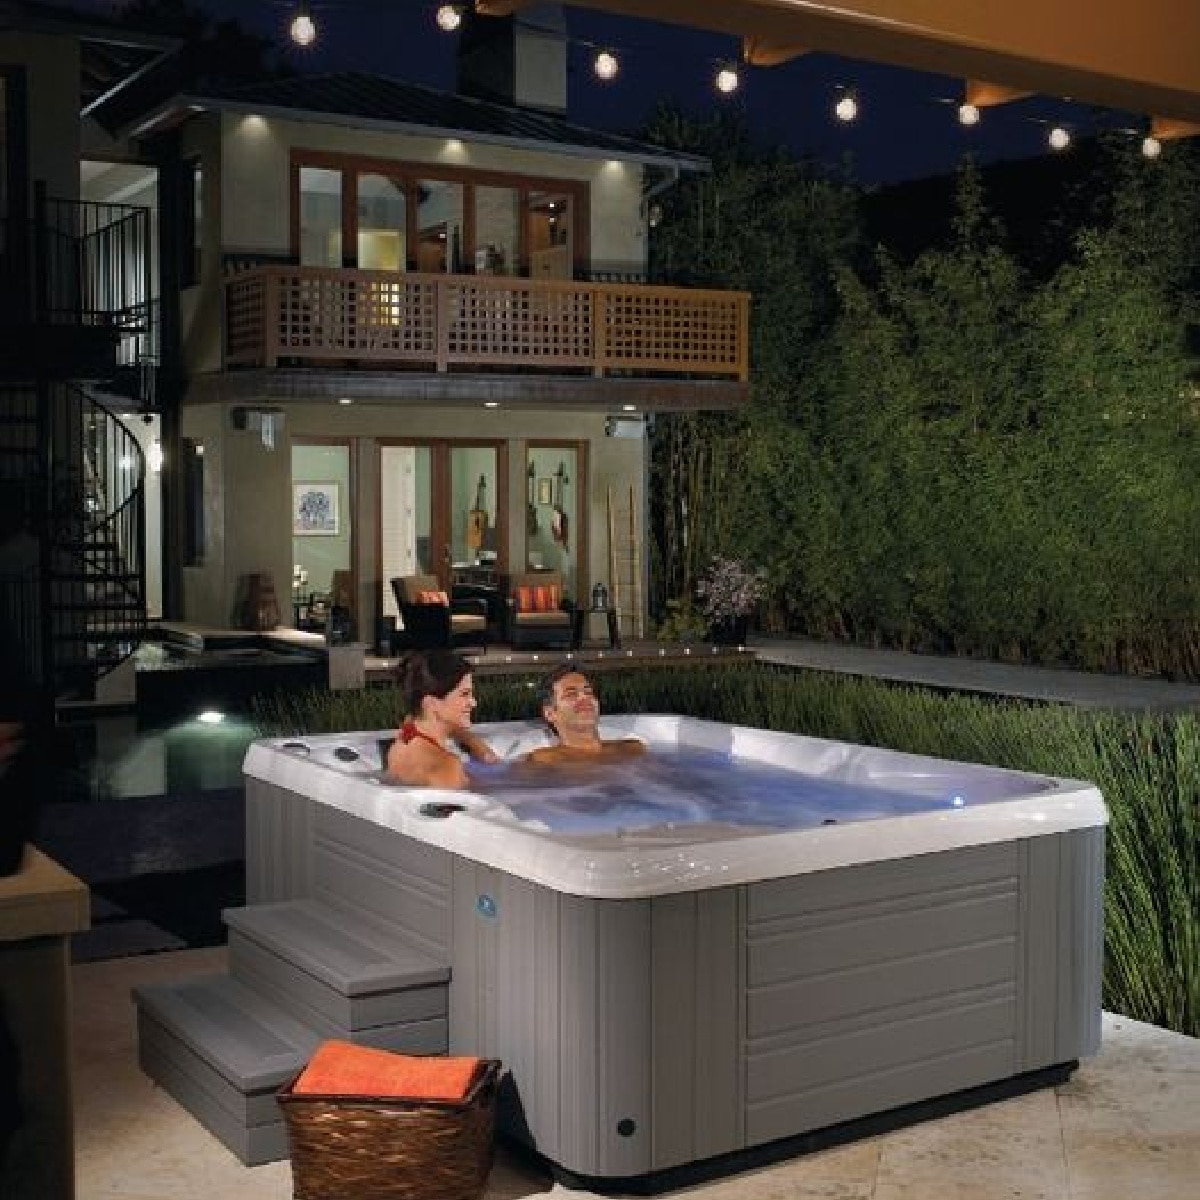 couple using hot tub at night in fall